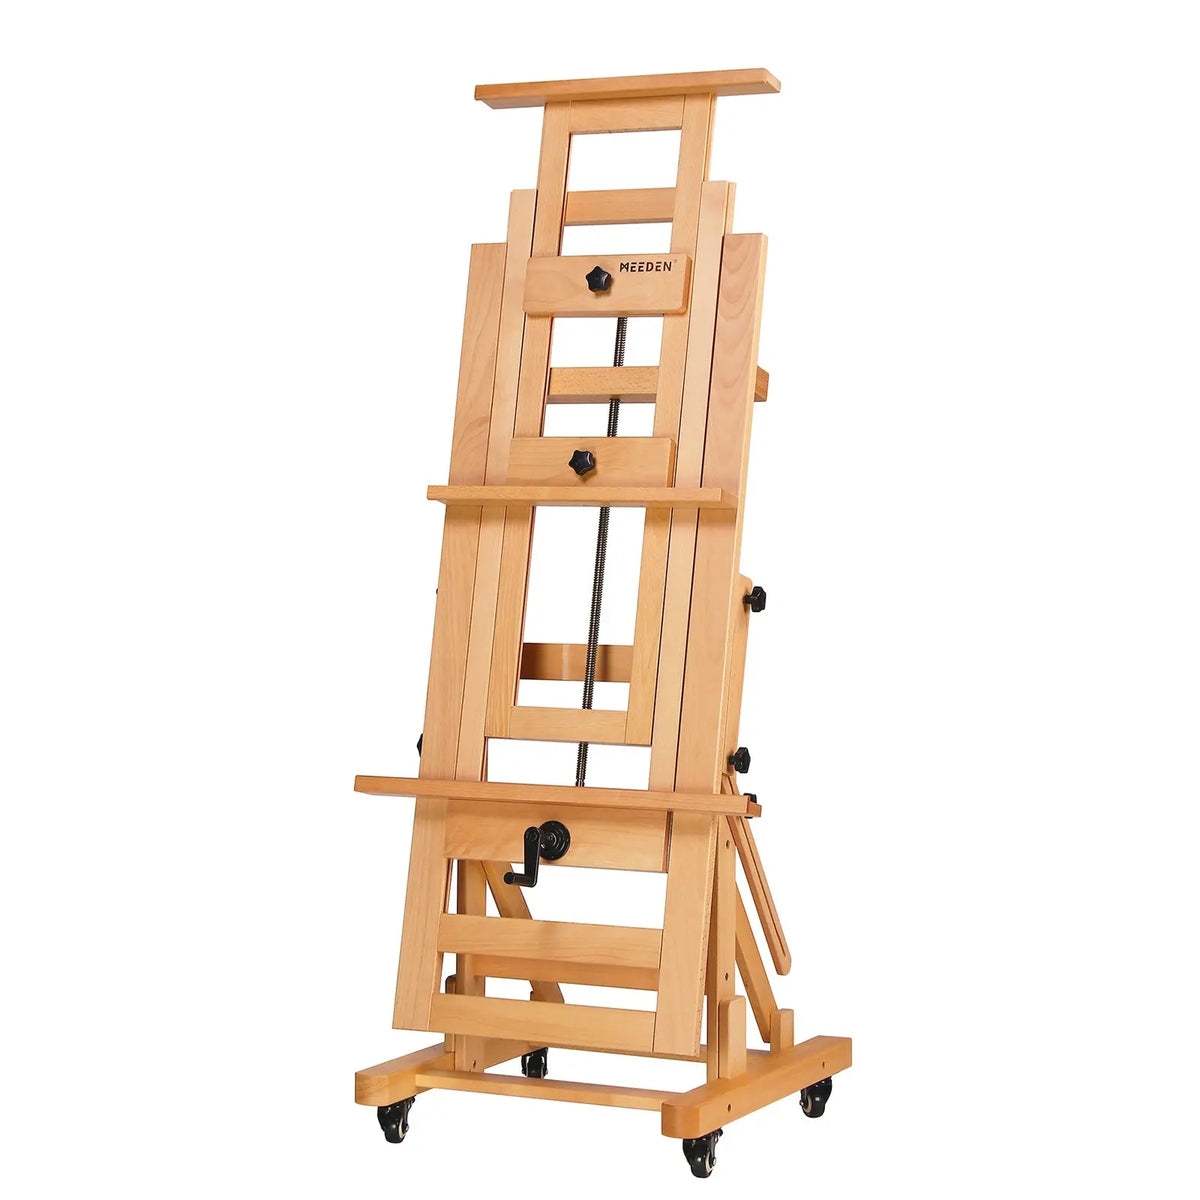 MEEDEN Extra Large Heavy-Duty H-Frame Studio Easel - Solid Beech Wooden  Artist Professional Easel, Painting